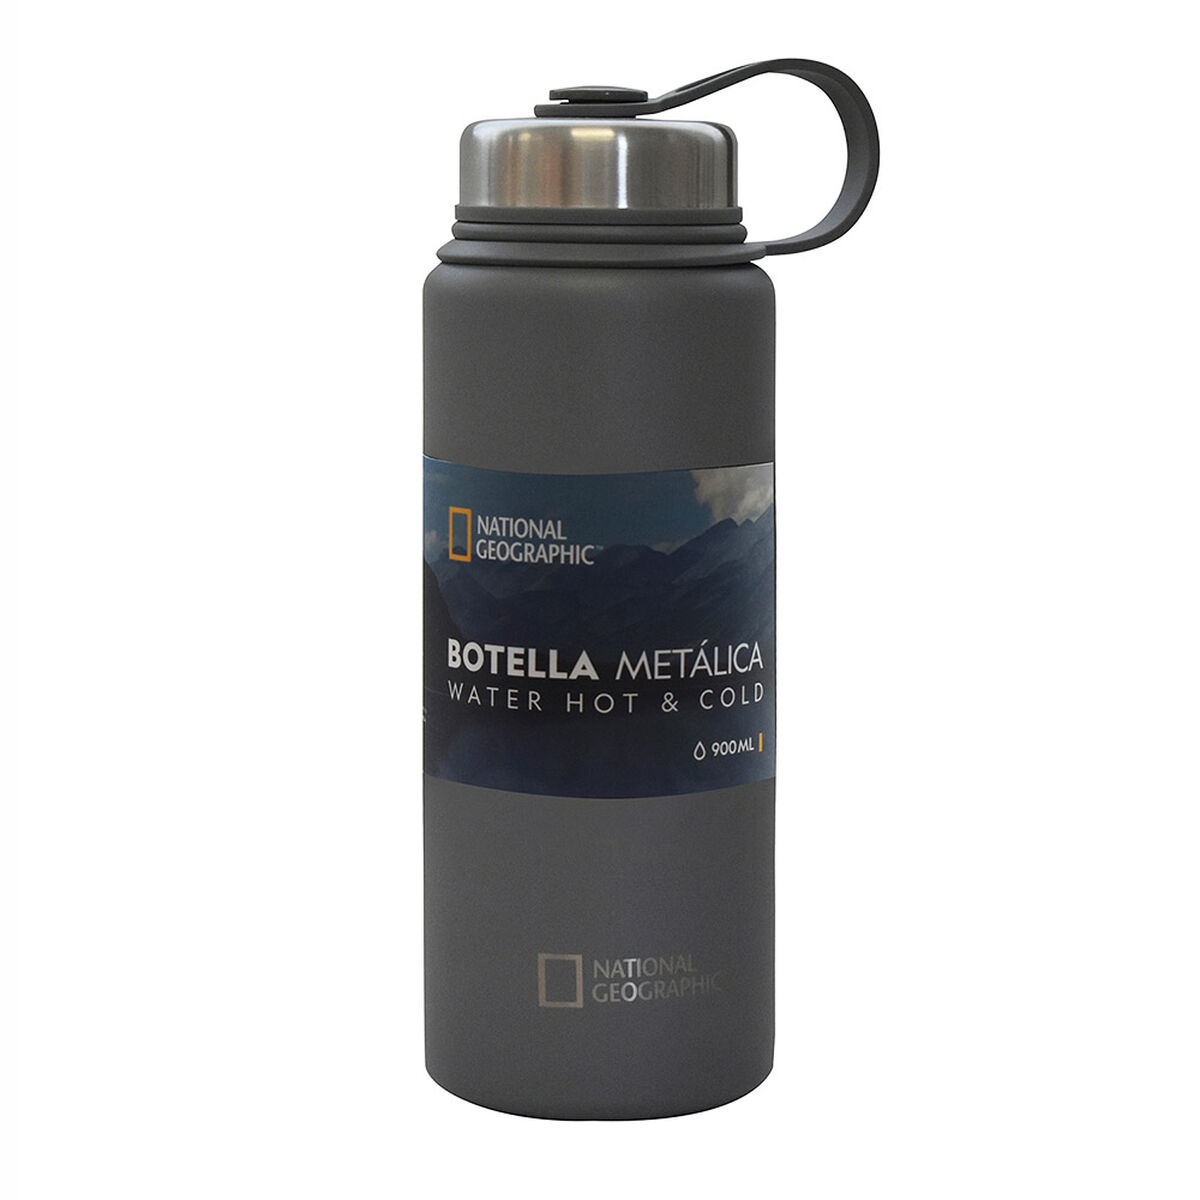 Botella Metálica National Geographic 900 ml Gris